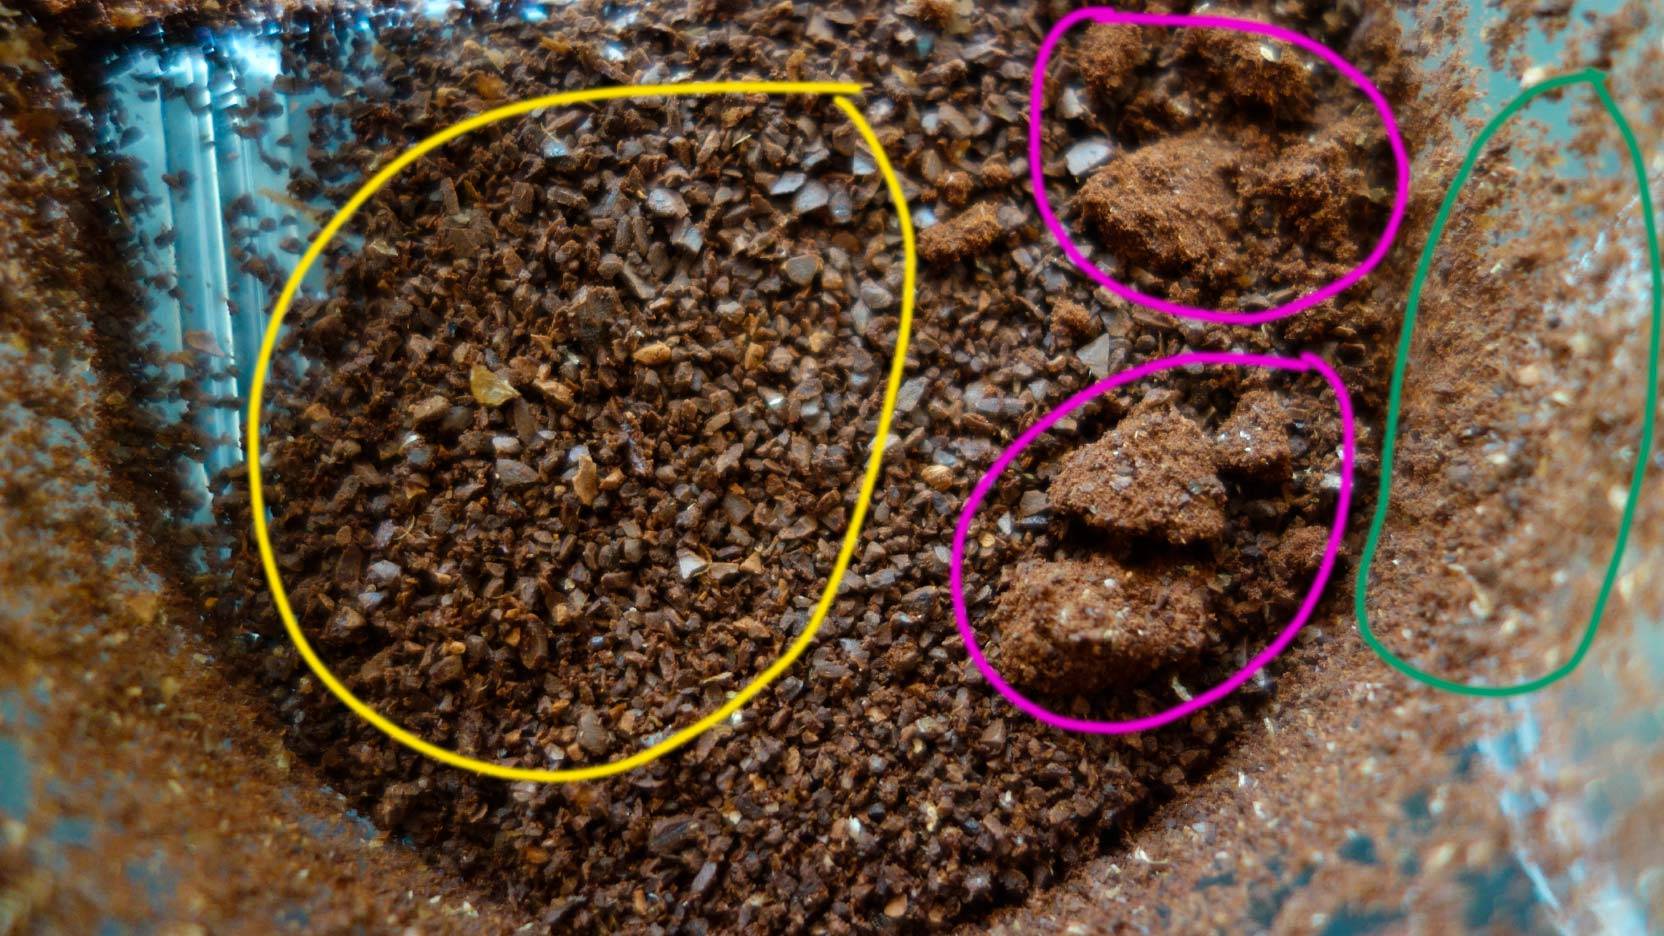 Image of the coffee container for the Russell Hobbs coffee grinder with freshly ground coffee in it – notice the three coloured markings